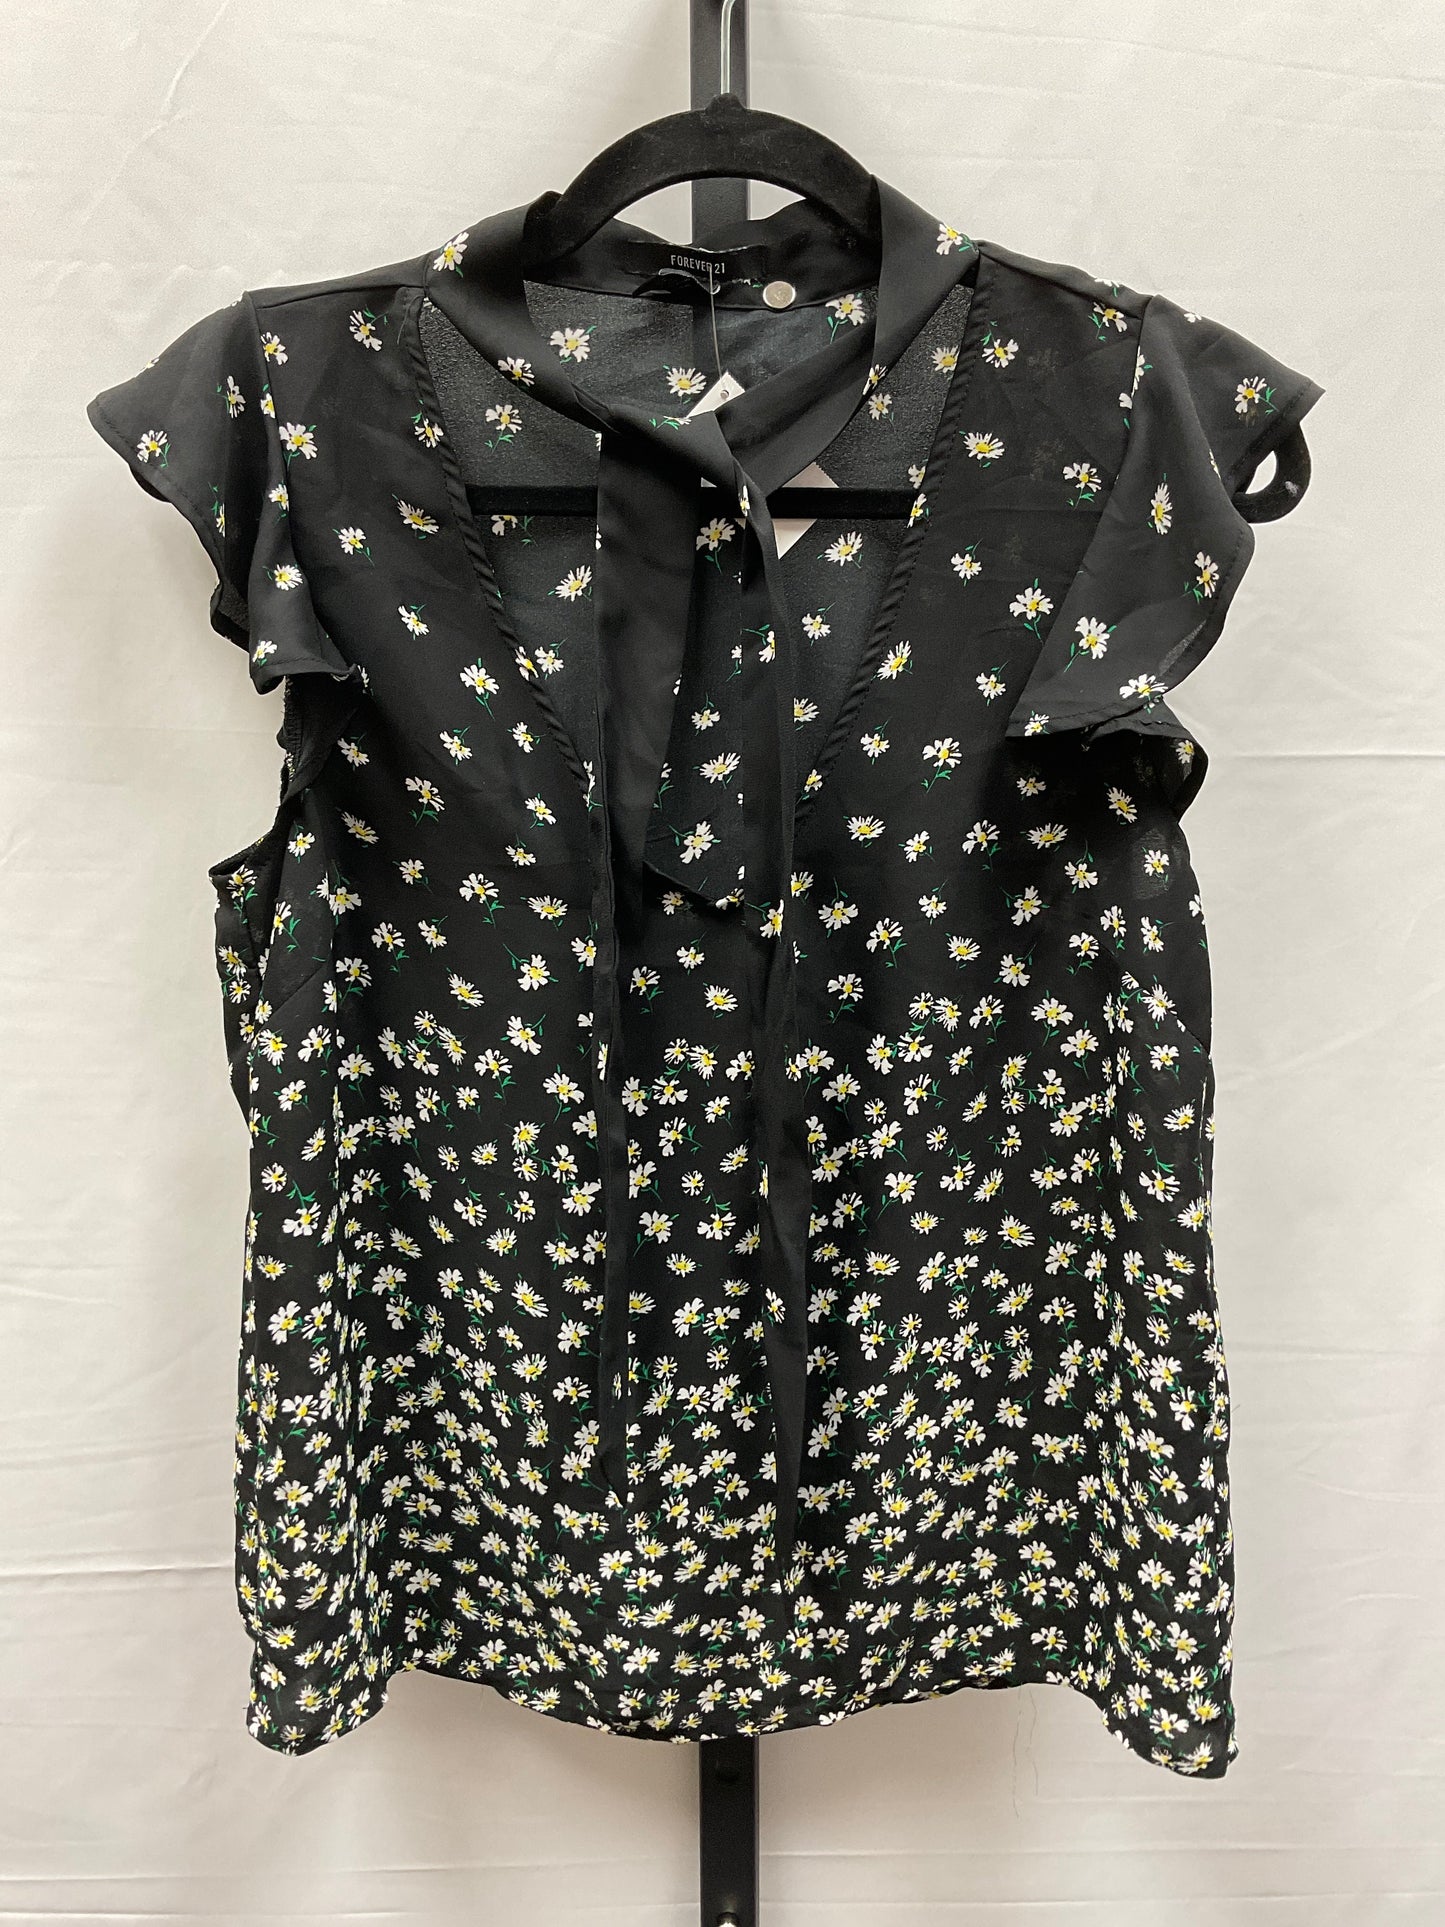 Floral Print Top Short Sleeve Forever 21, Size S